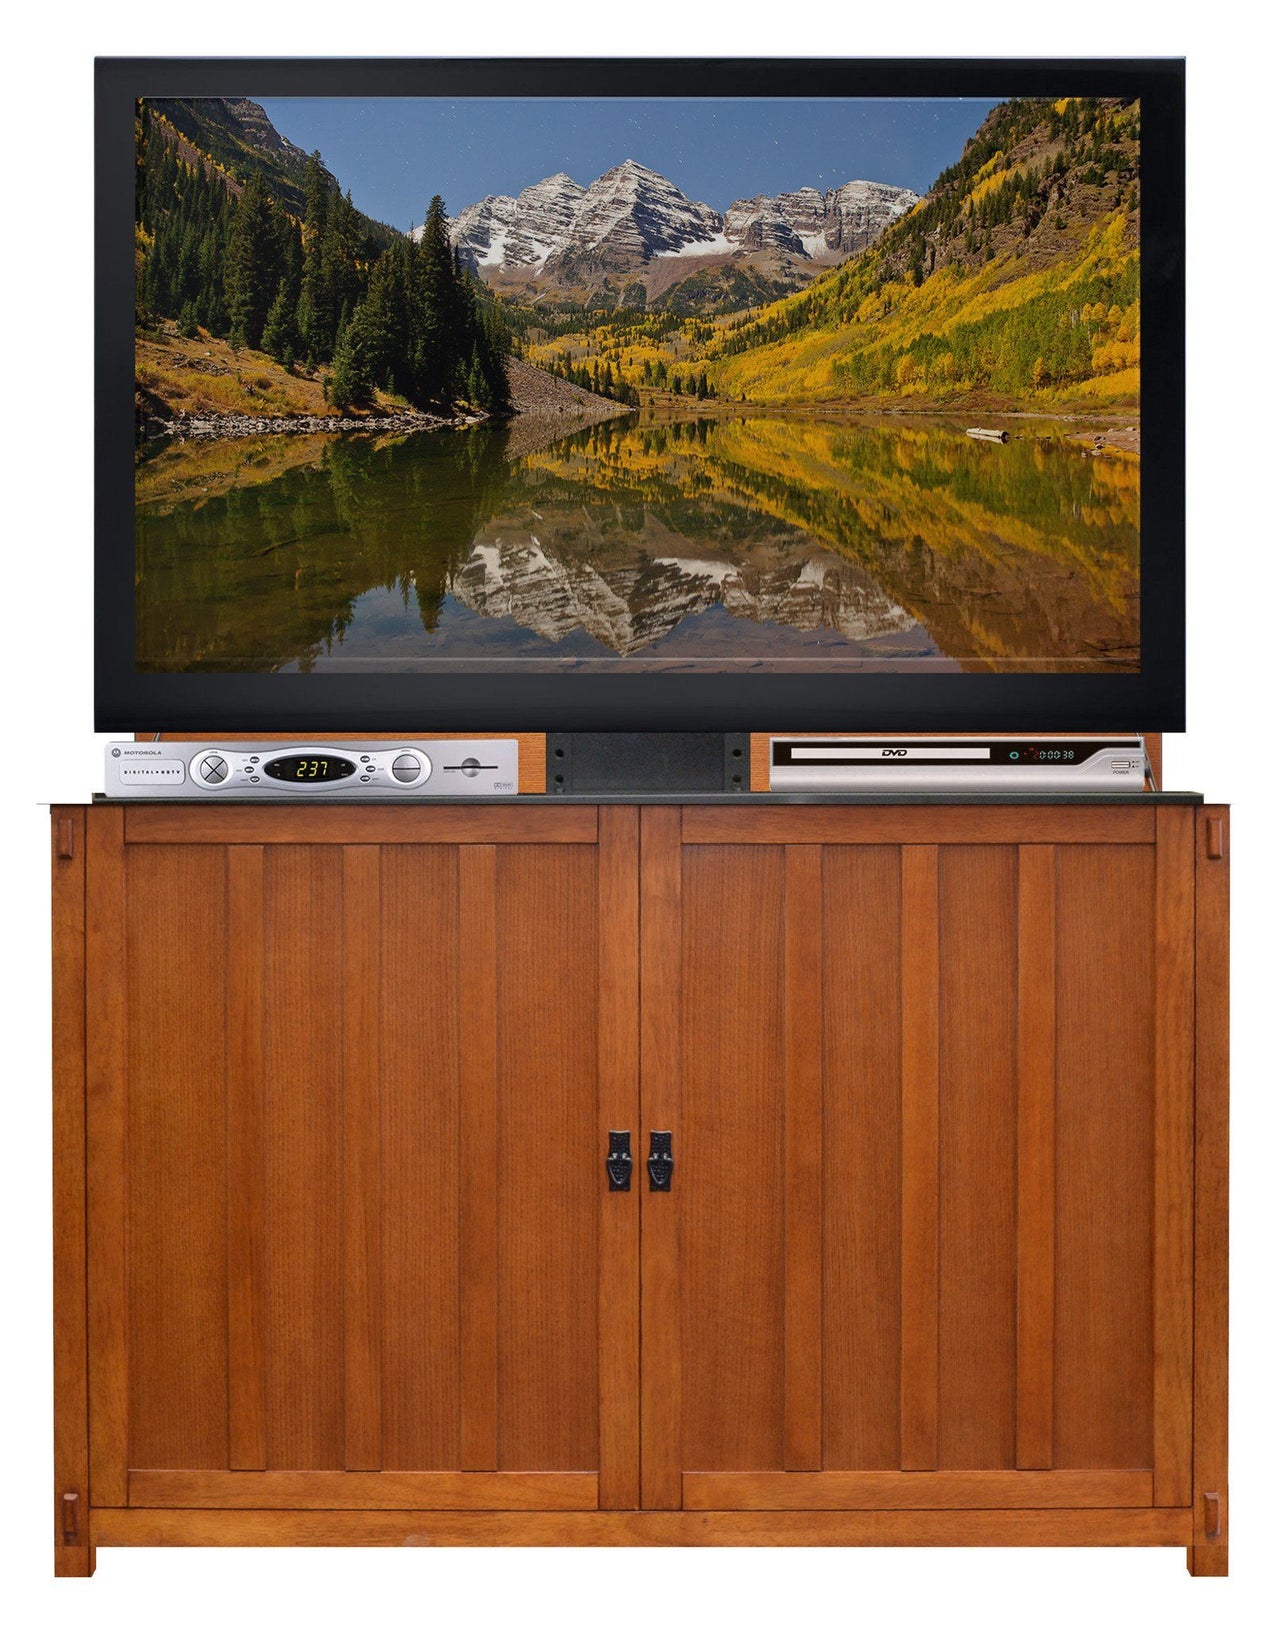 Touchstone Grand Elevate - Mission Lift Cabinets For Up To 60” Flat Screen Tv’S Tv Lift Cabinets Touchstone 